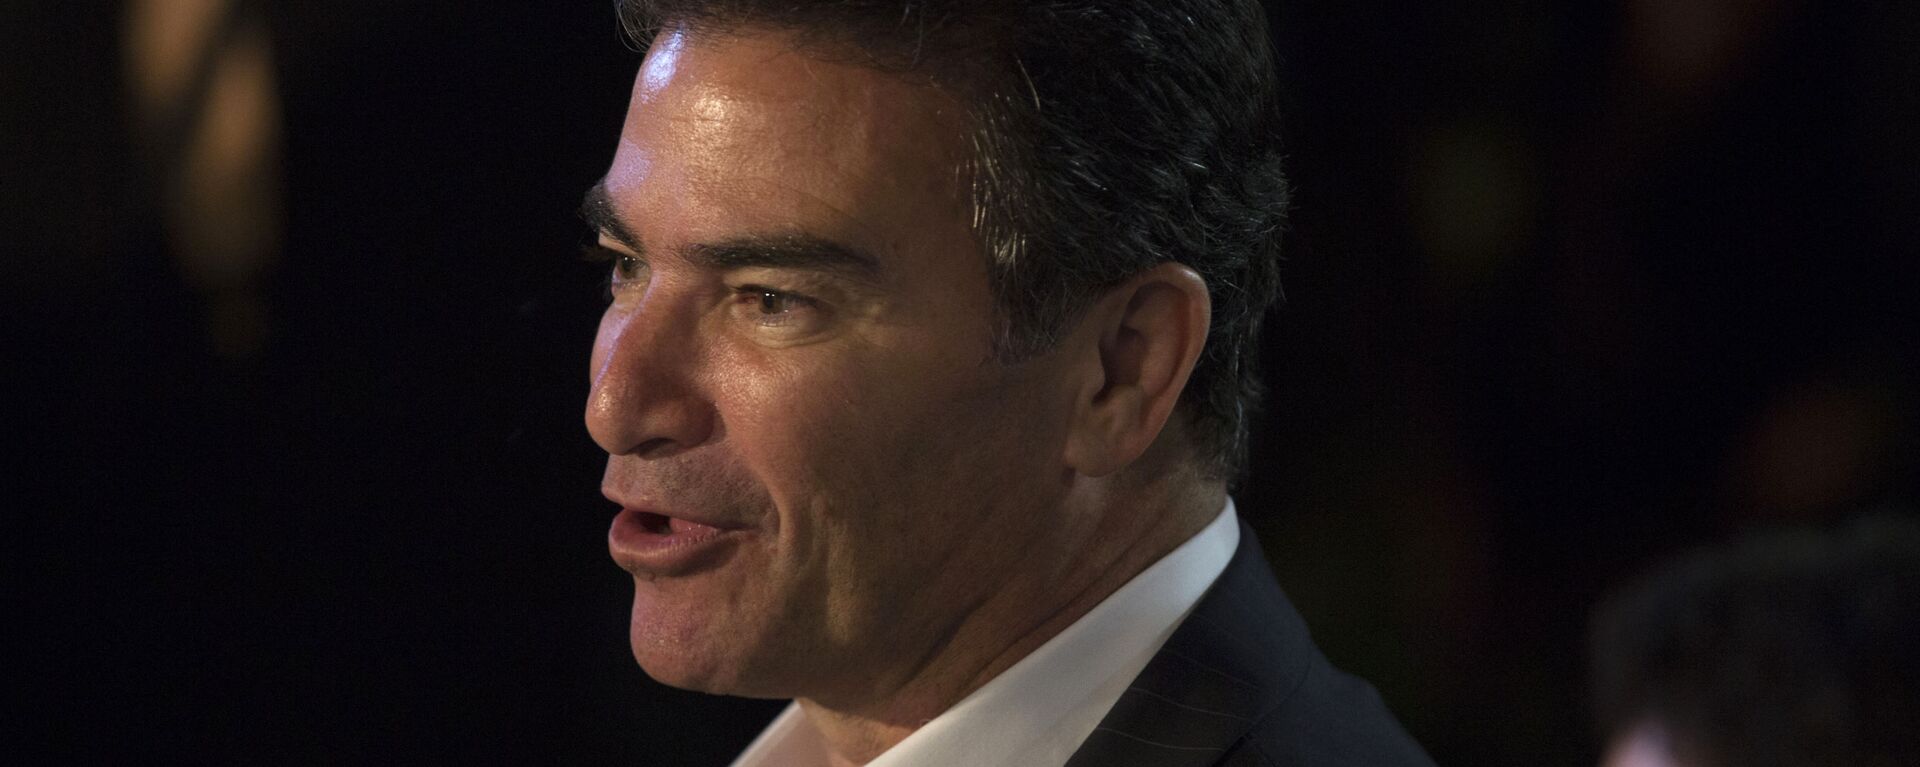 Yossi Cohen, the head of the Israeli Mossad attends a Fourth of July Independence Day celebration at the residence of the US Ambassador to Israel in Herzilya Pituah on July 3, 2017. - Sputnik International, 1920, 19.07.2021